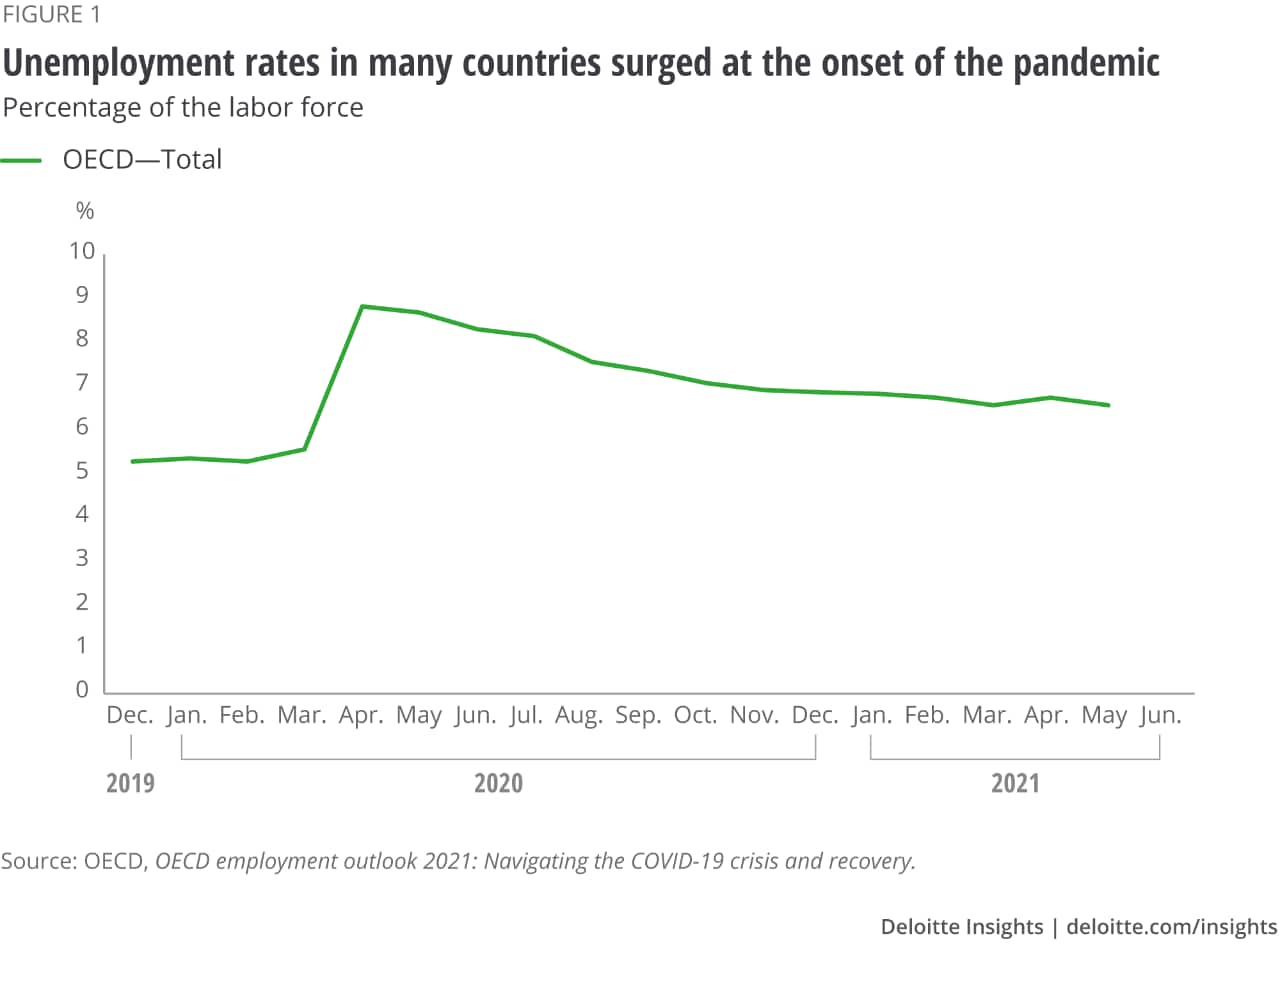 Figure 1. Unemployment rates in many countries surged at the onset of the pandemic